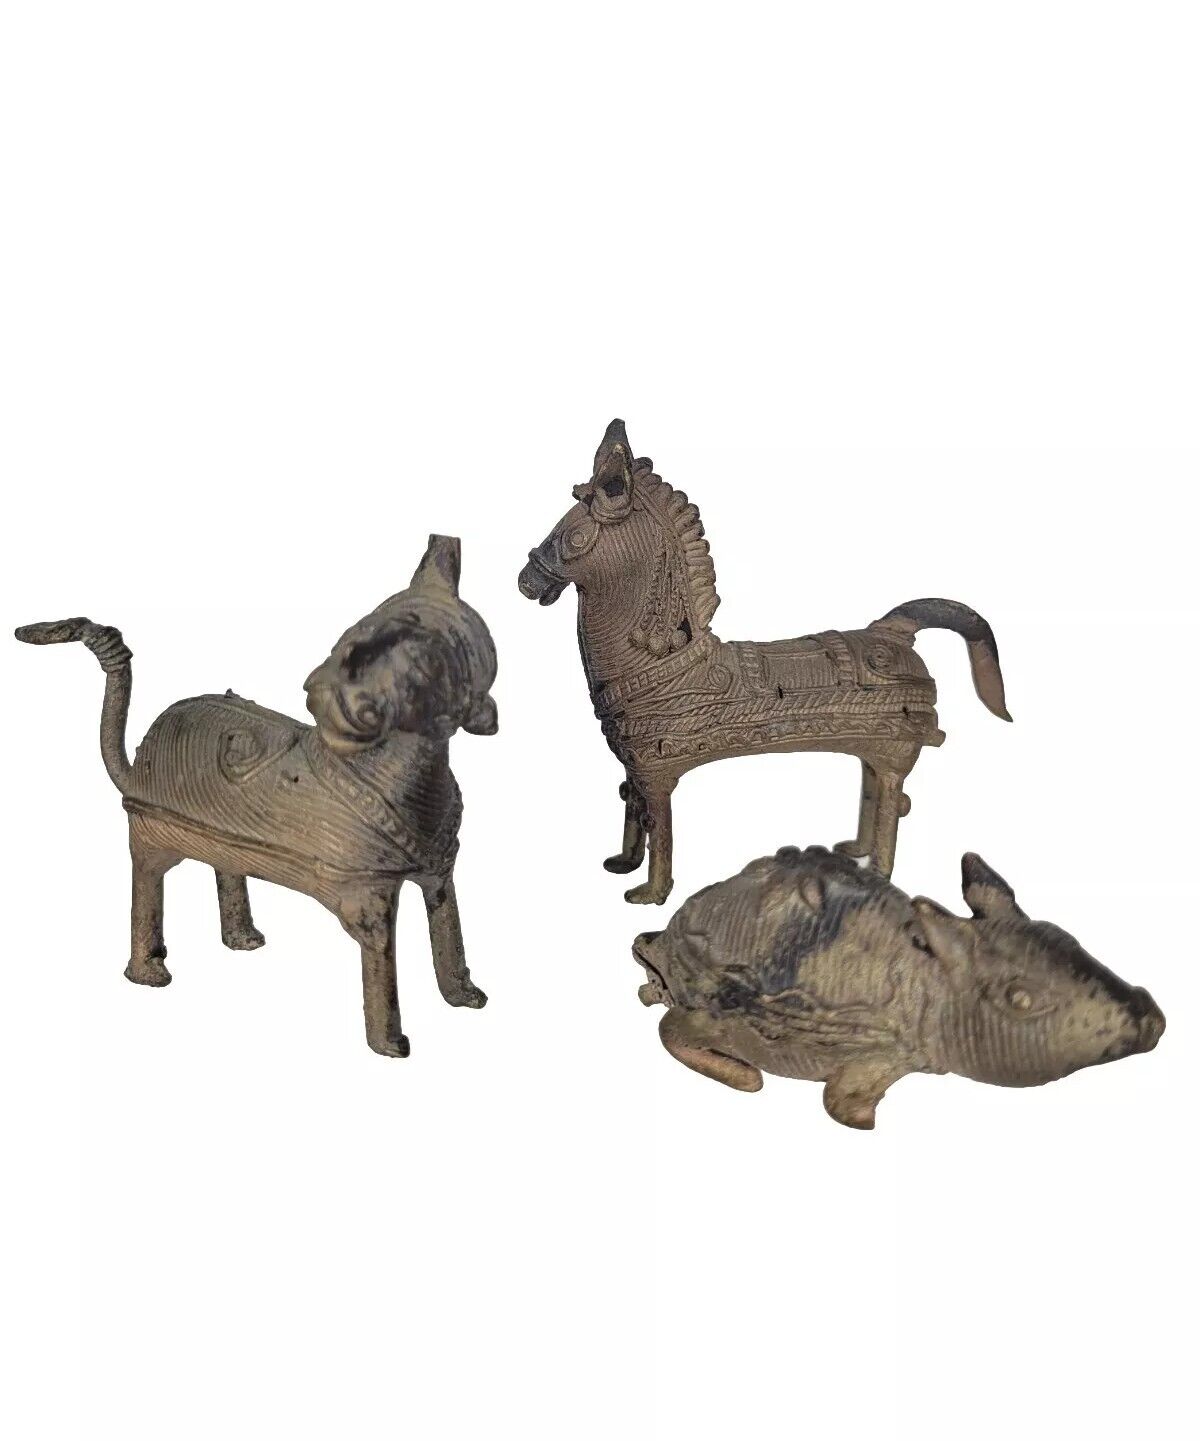 Vtg Antique Dhokra Animal Sculptures Mouse Horse Brass Indian Mythical Lot Of 3